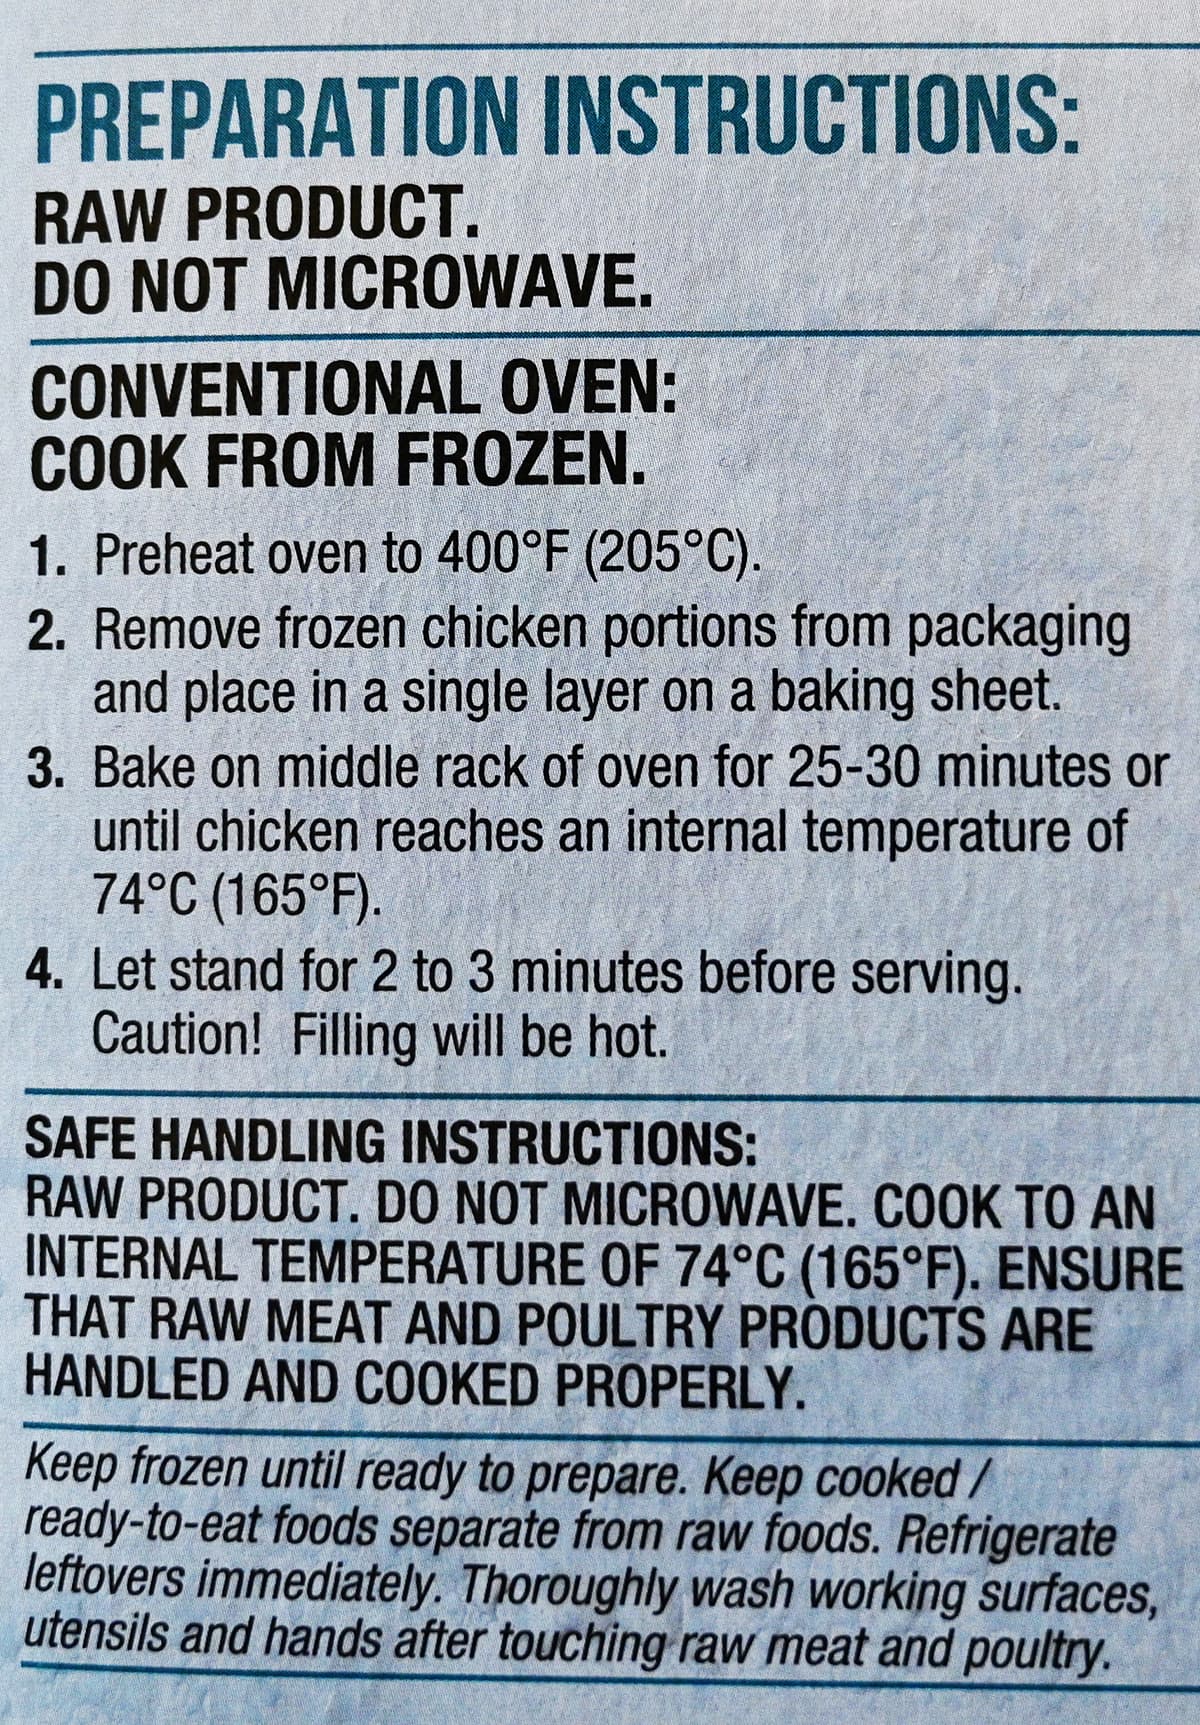 Image of the cooking instructions for the chicken breasts from the back of the box.